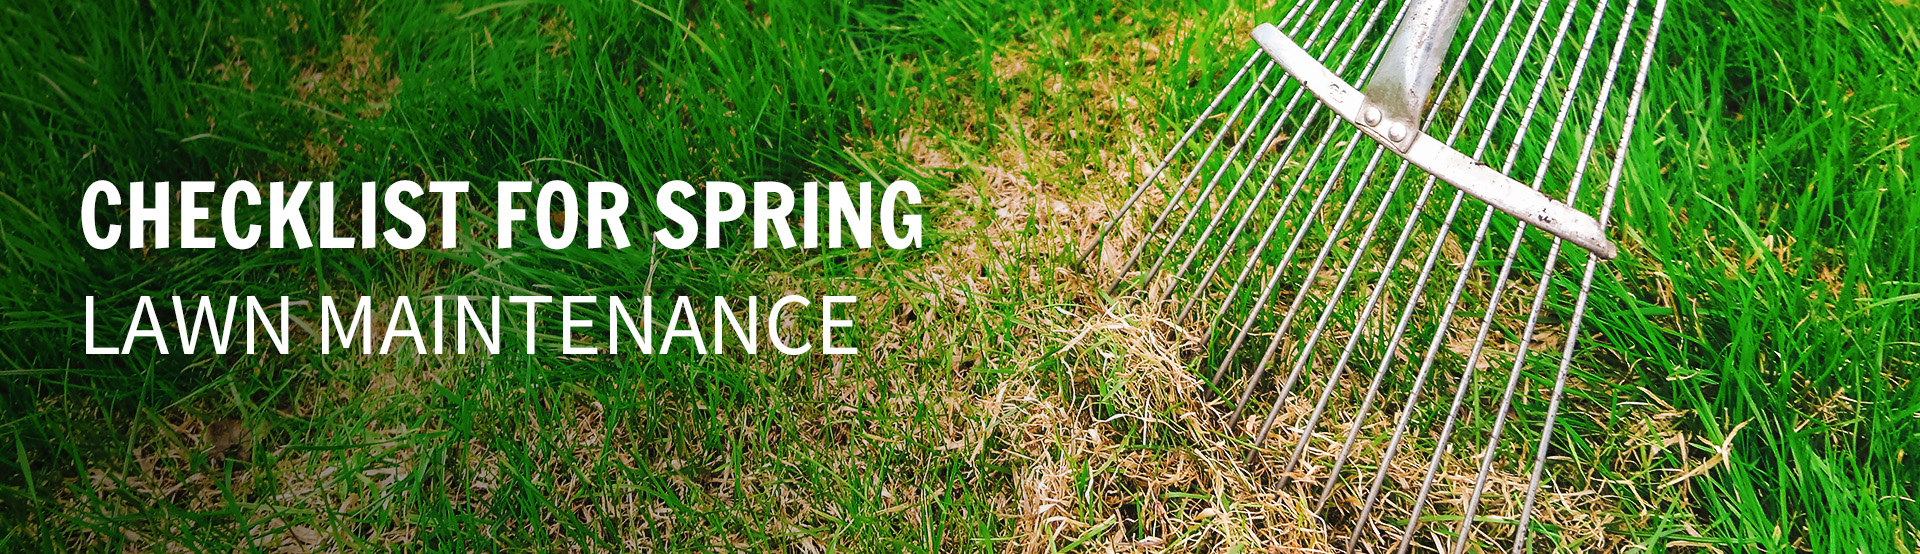 Checklist for spring lawn maintenance hero image